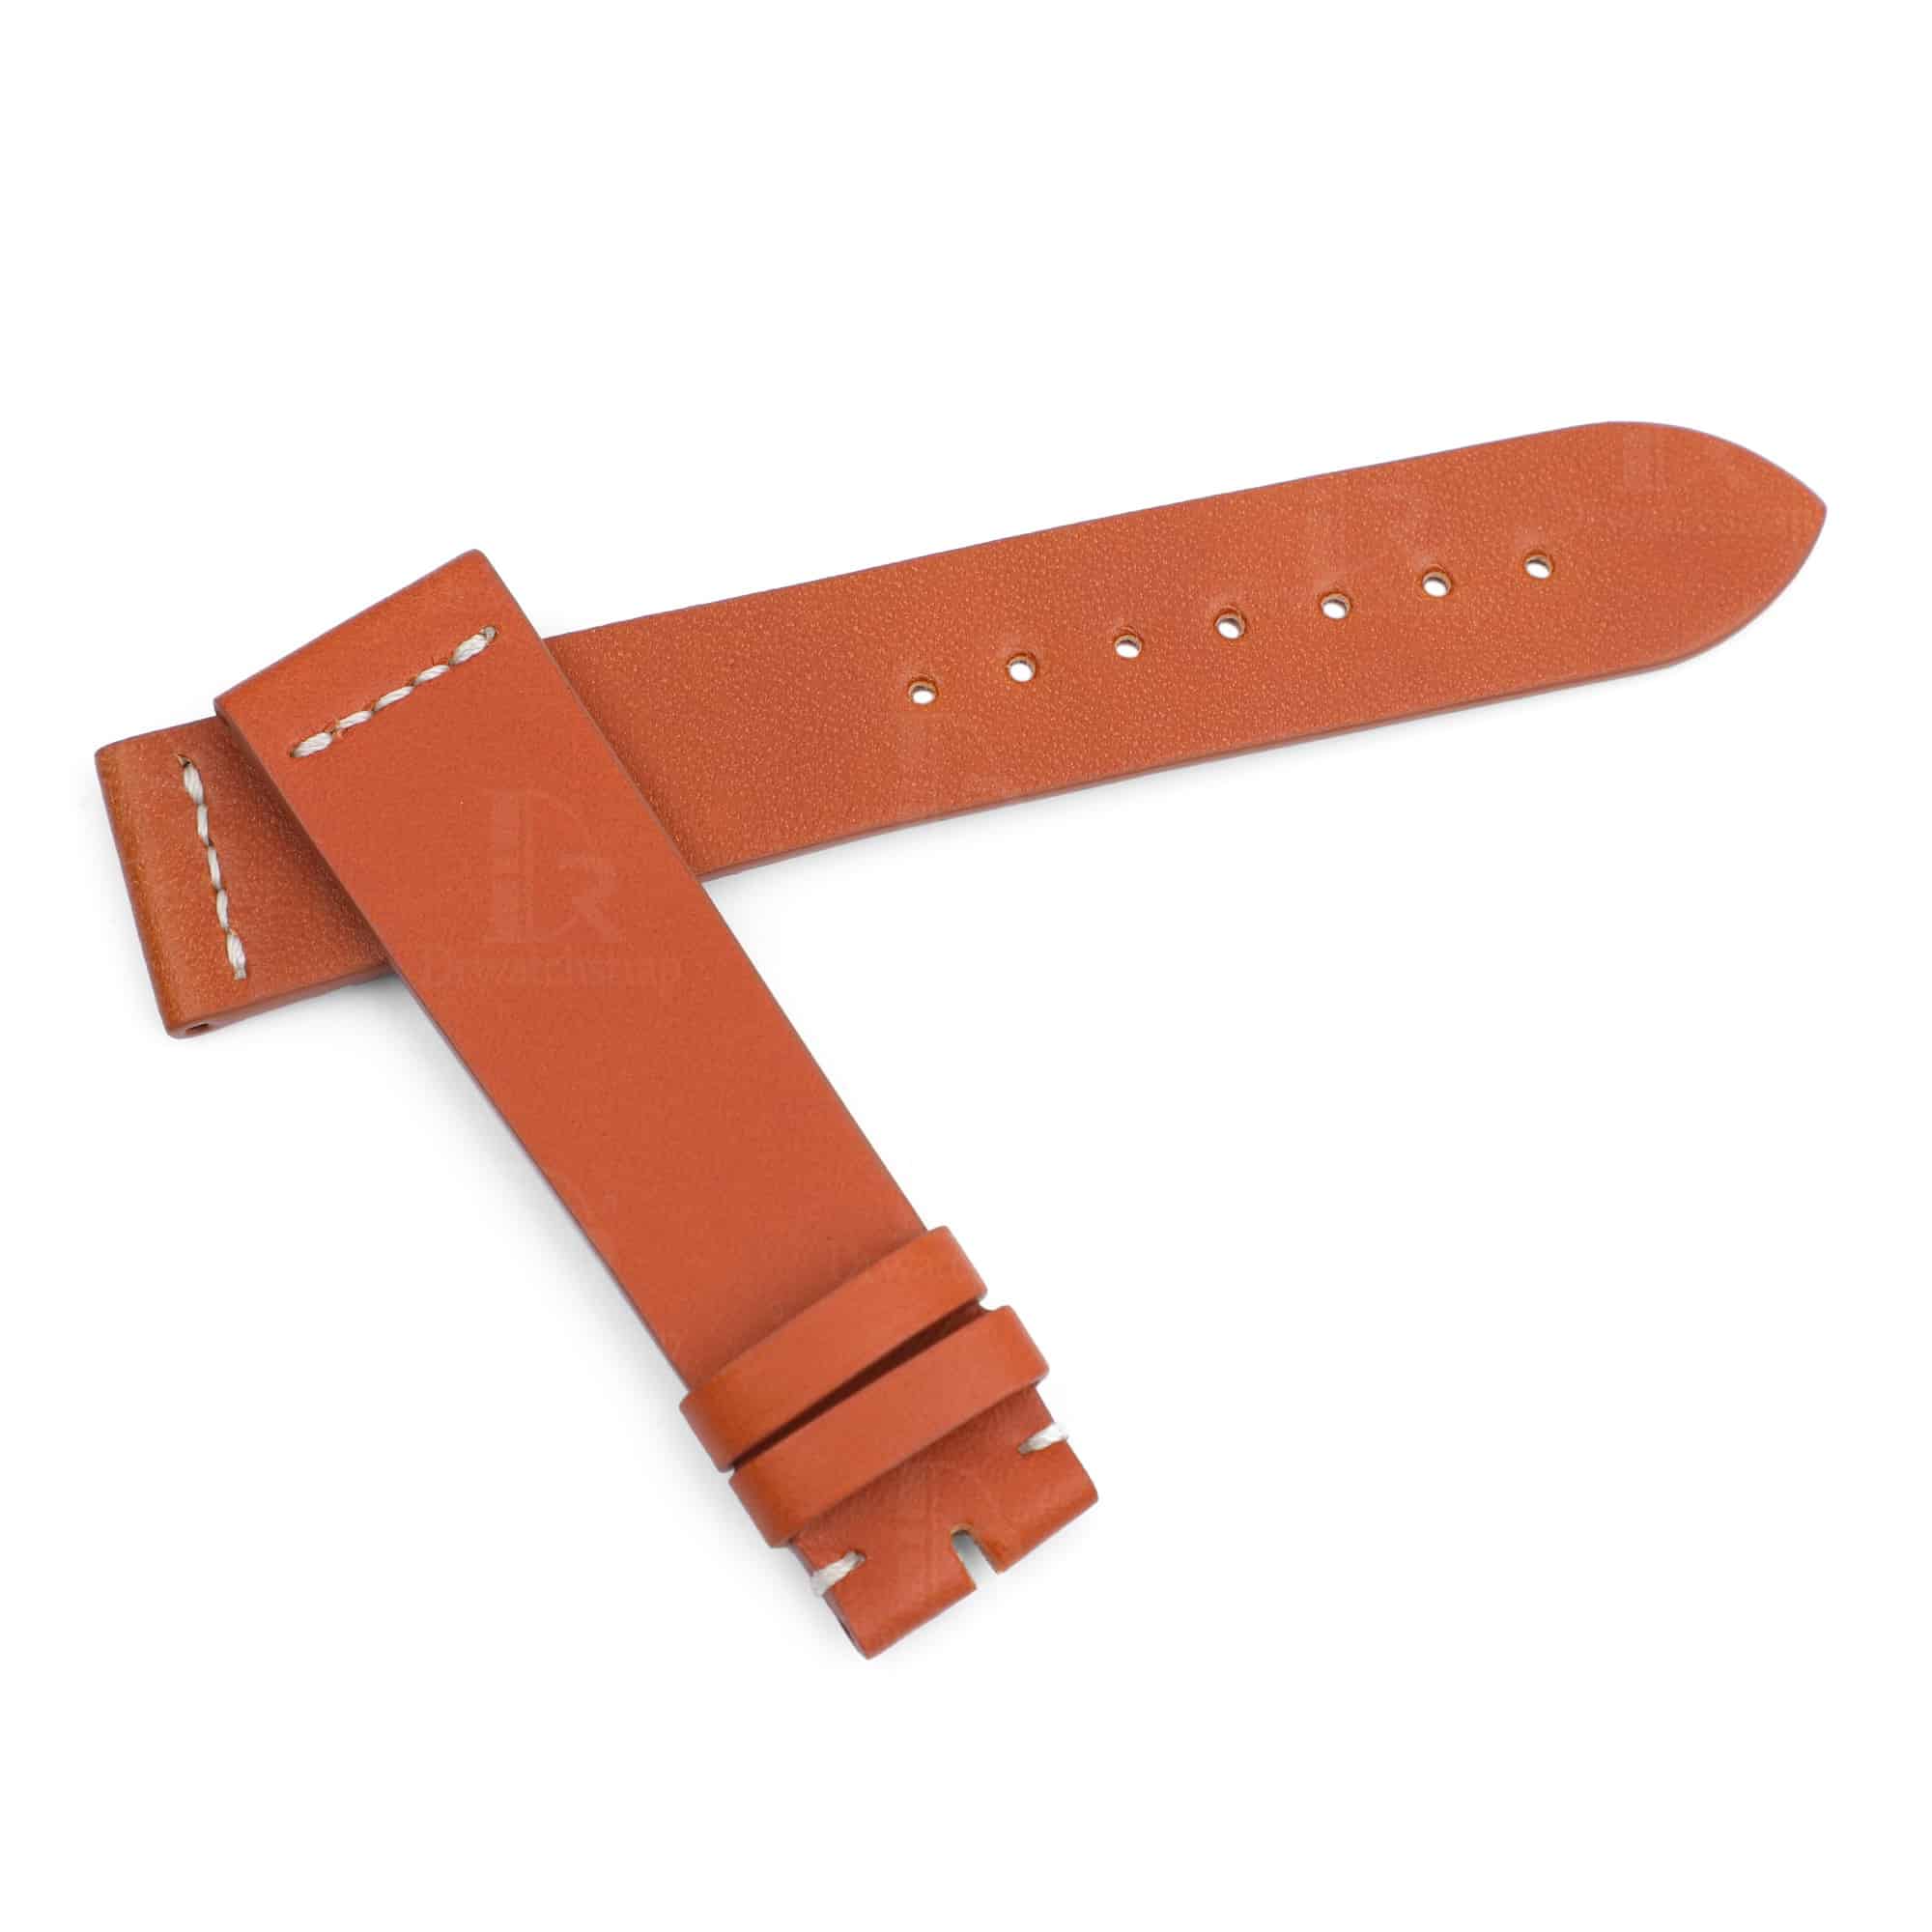 Custom best High-end qualtiy premium calfskin orange replacement leather Rolex Hermes Strap and watch band with 20mm lug size handmade for Rolex, Tudor, Patek Philippe universale watches online at a low price